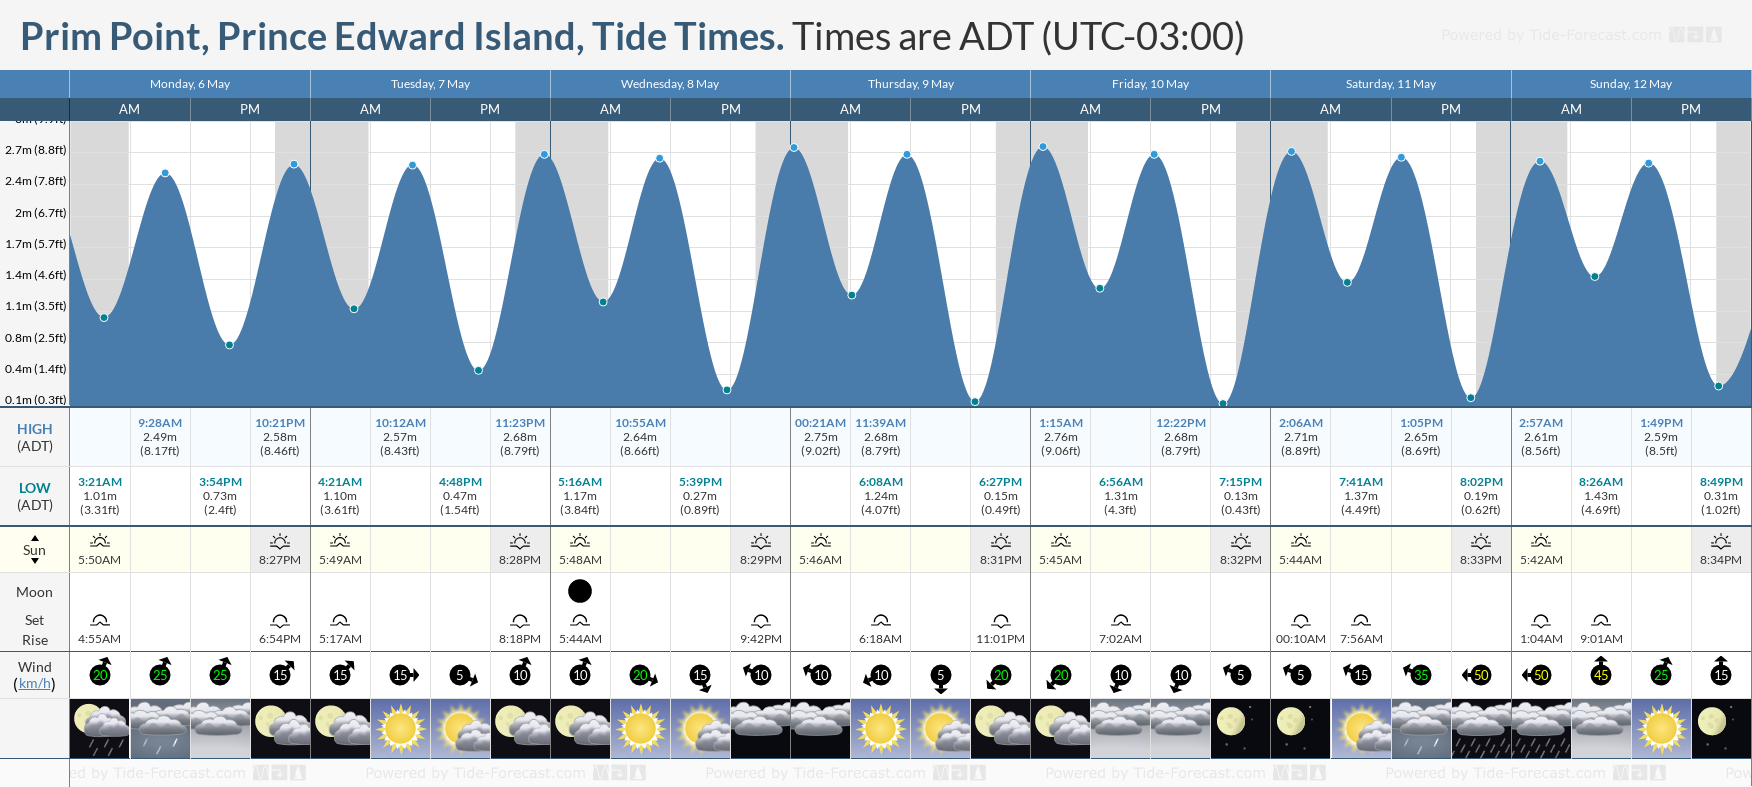 Prim Point, Prince Edward Island Tide Chart including high and low tide tide times for the next 7 days